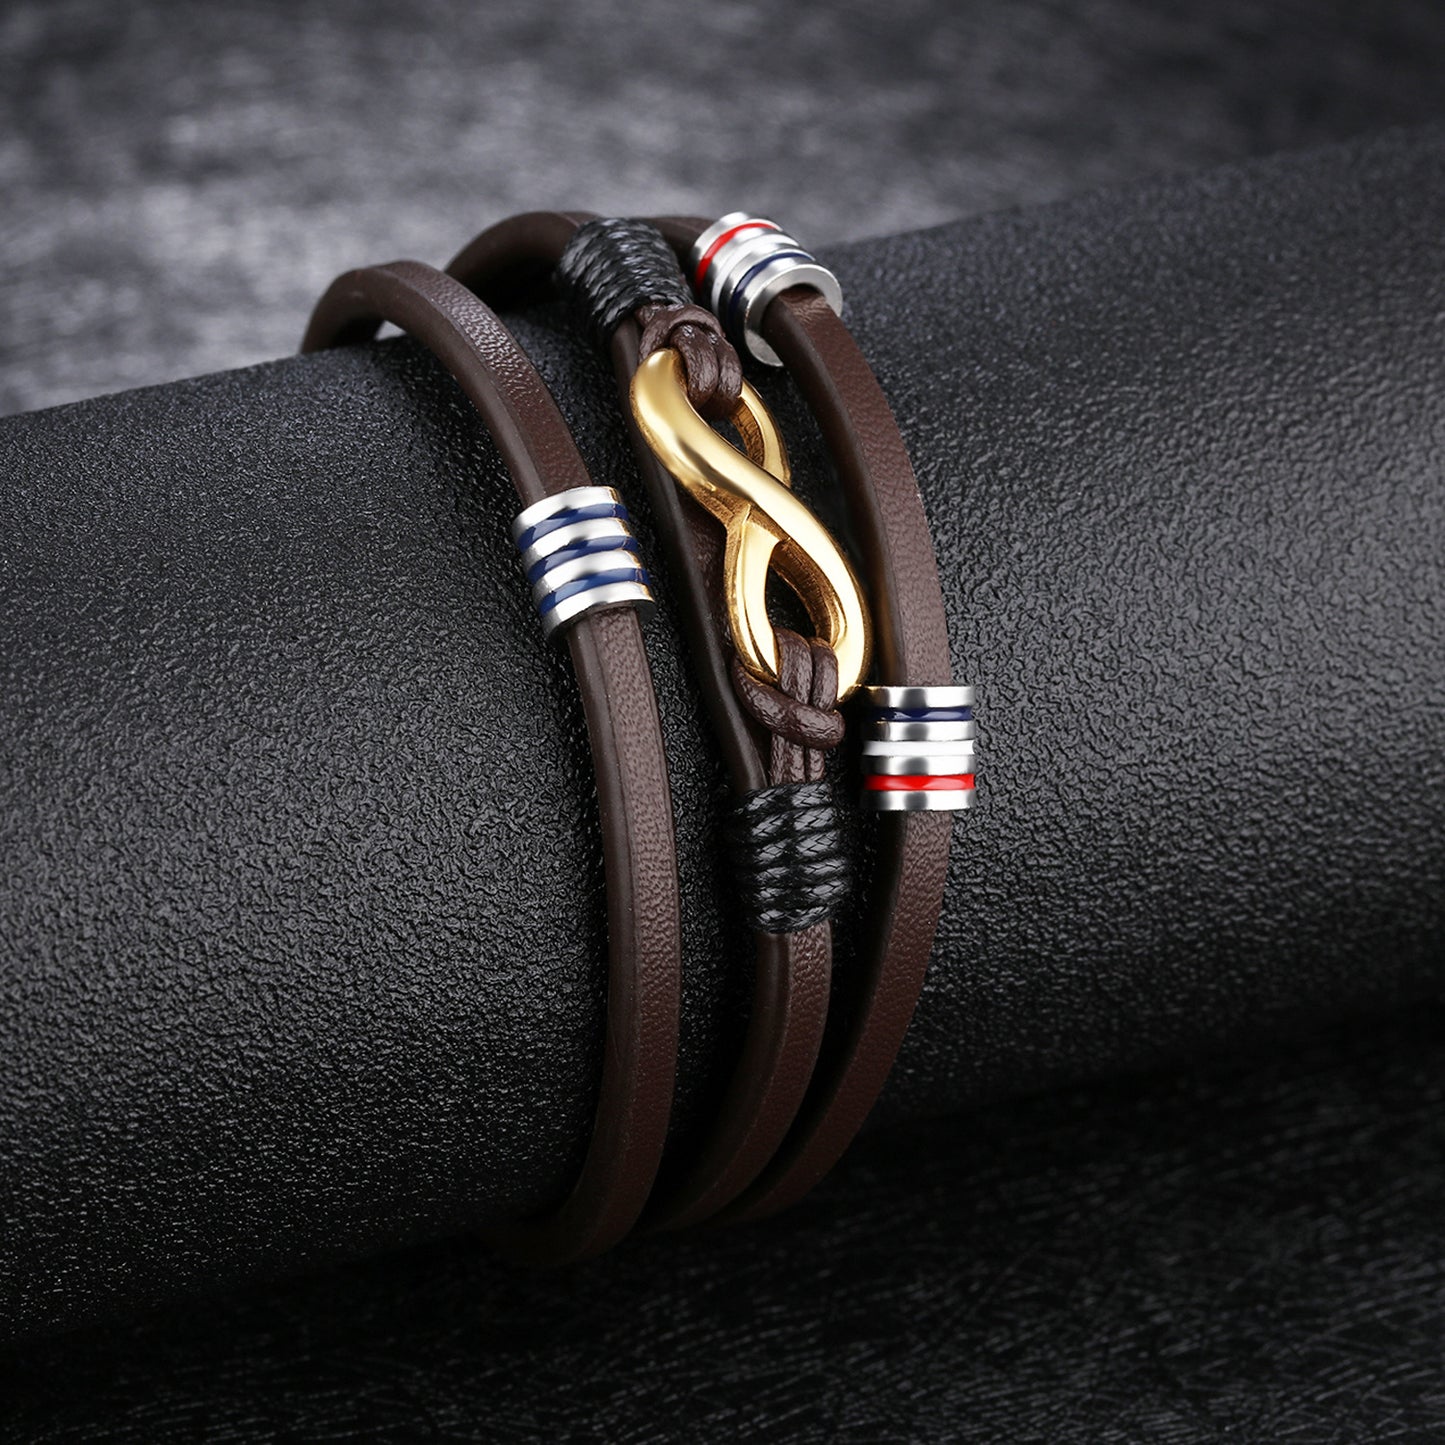 "Rustic North American Leather Bracelet - Handcrafted for Style and Durability" Roljord